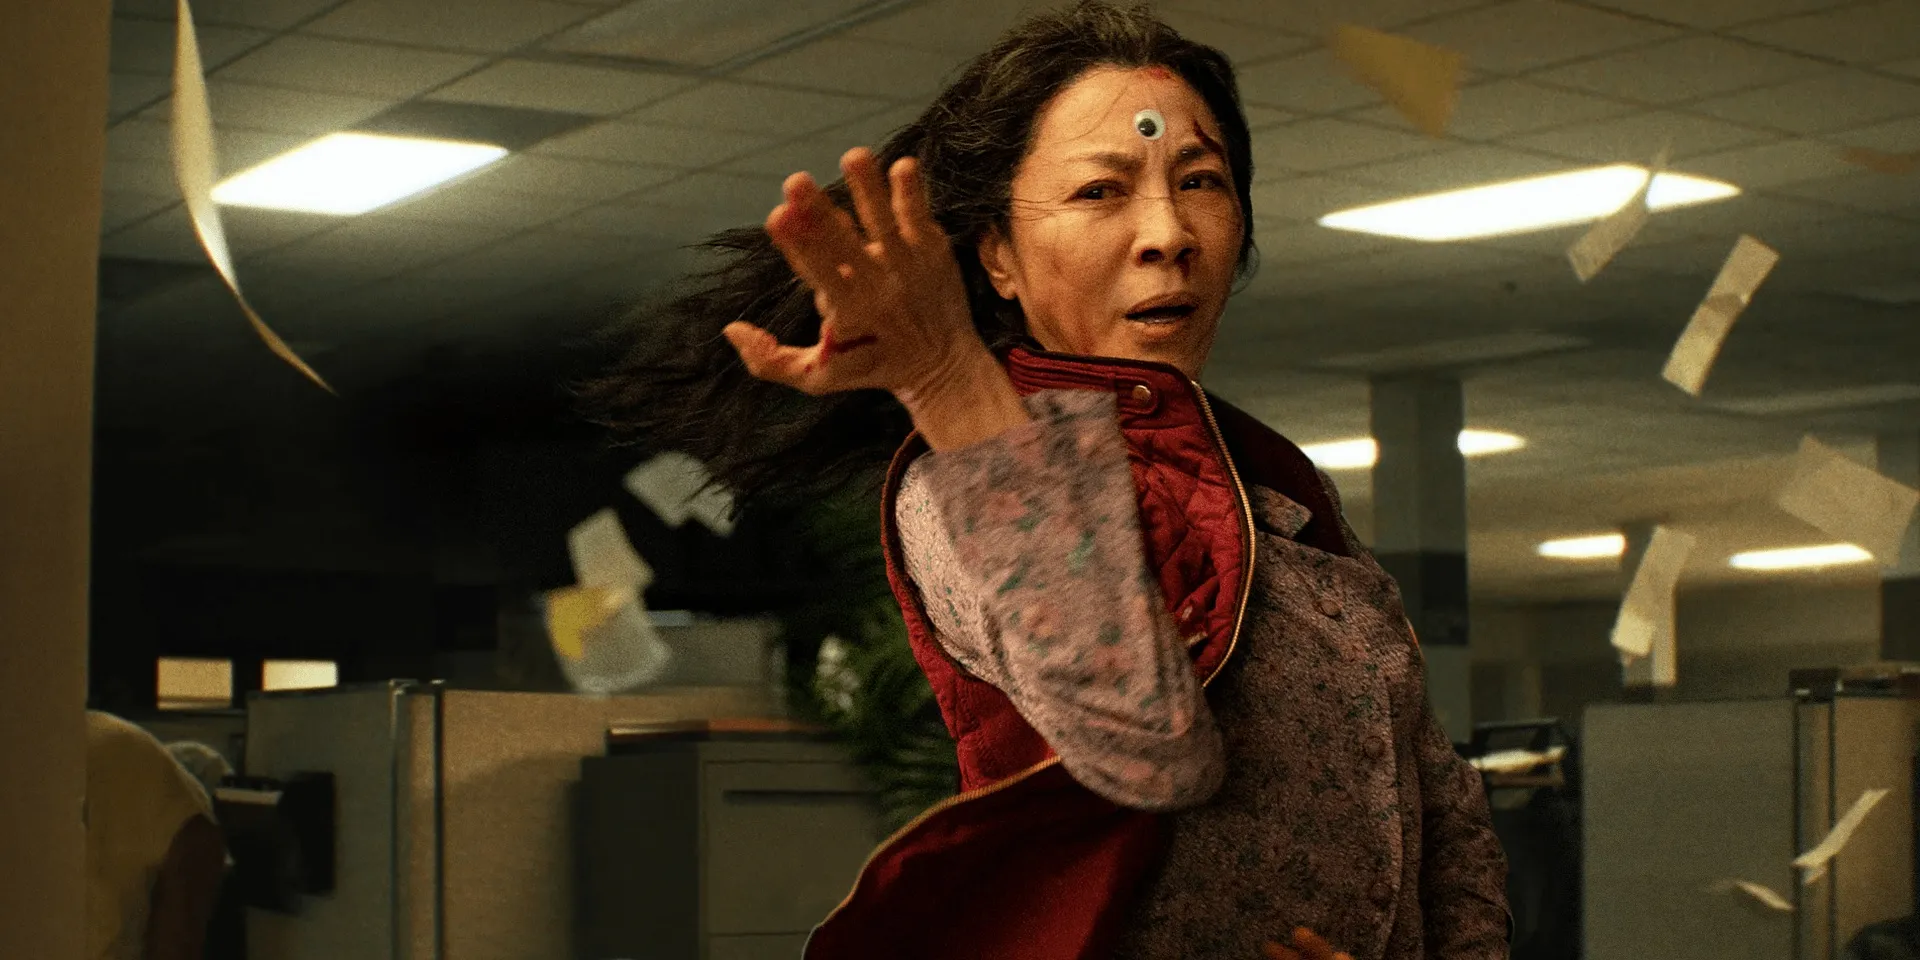 Michelle Yeoh strikes a martial arts pose in Everything Everywhere All at Once